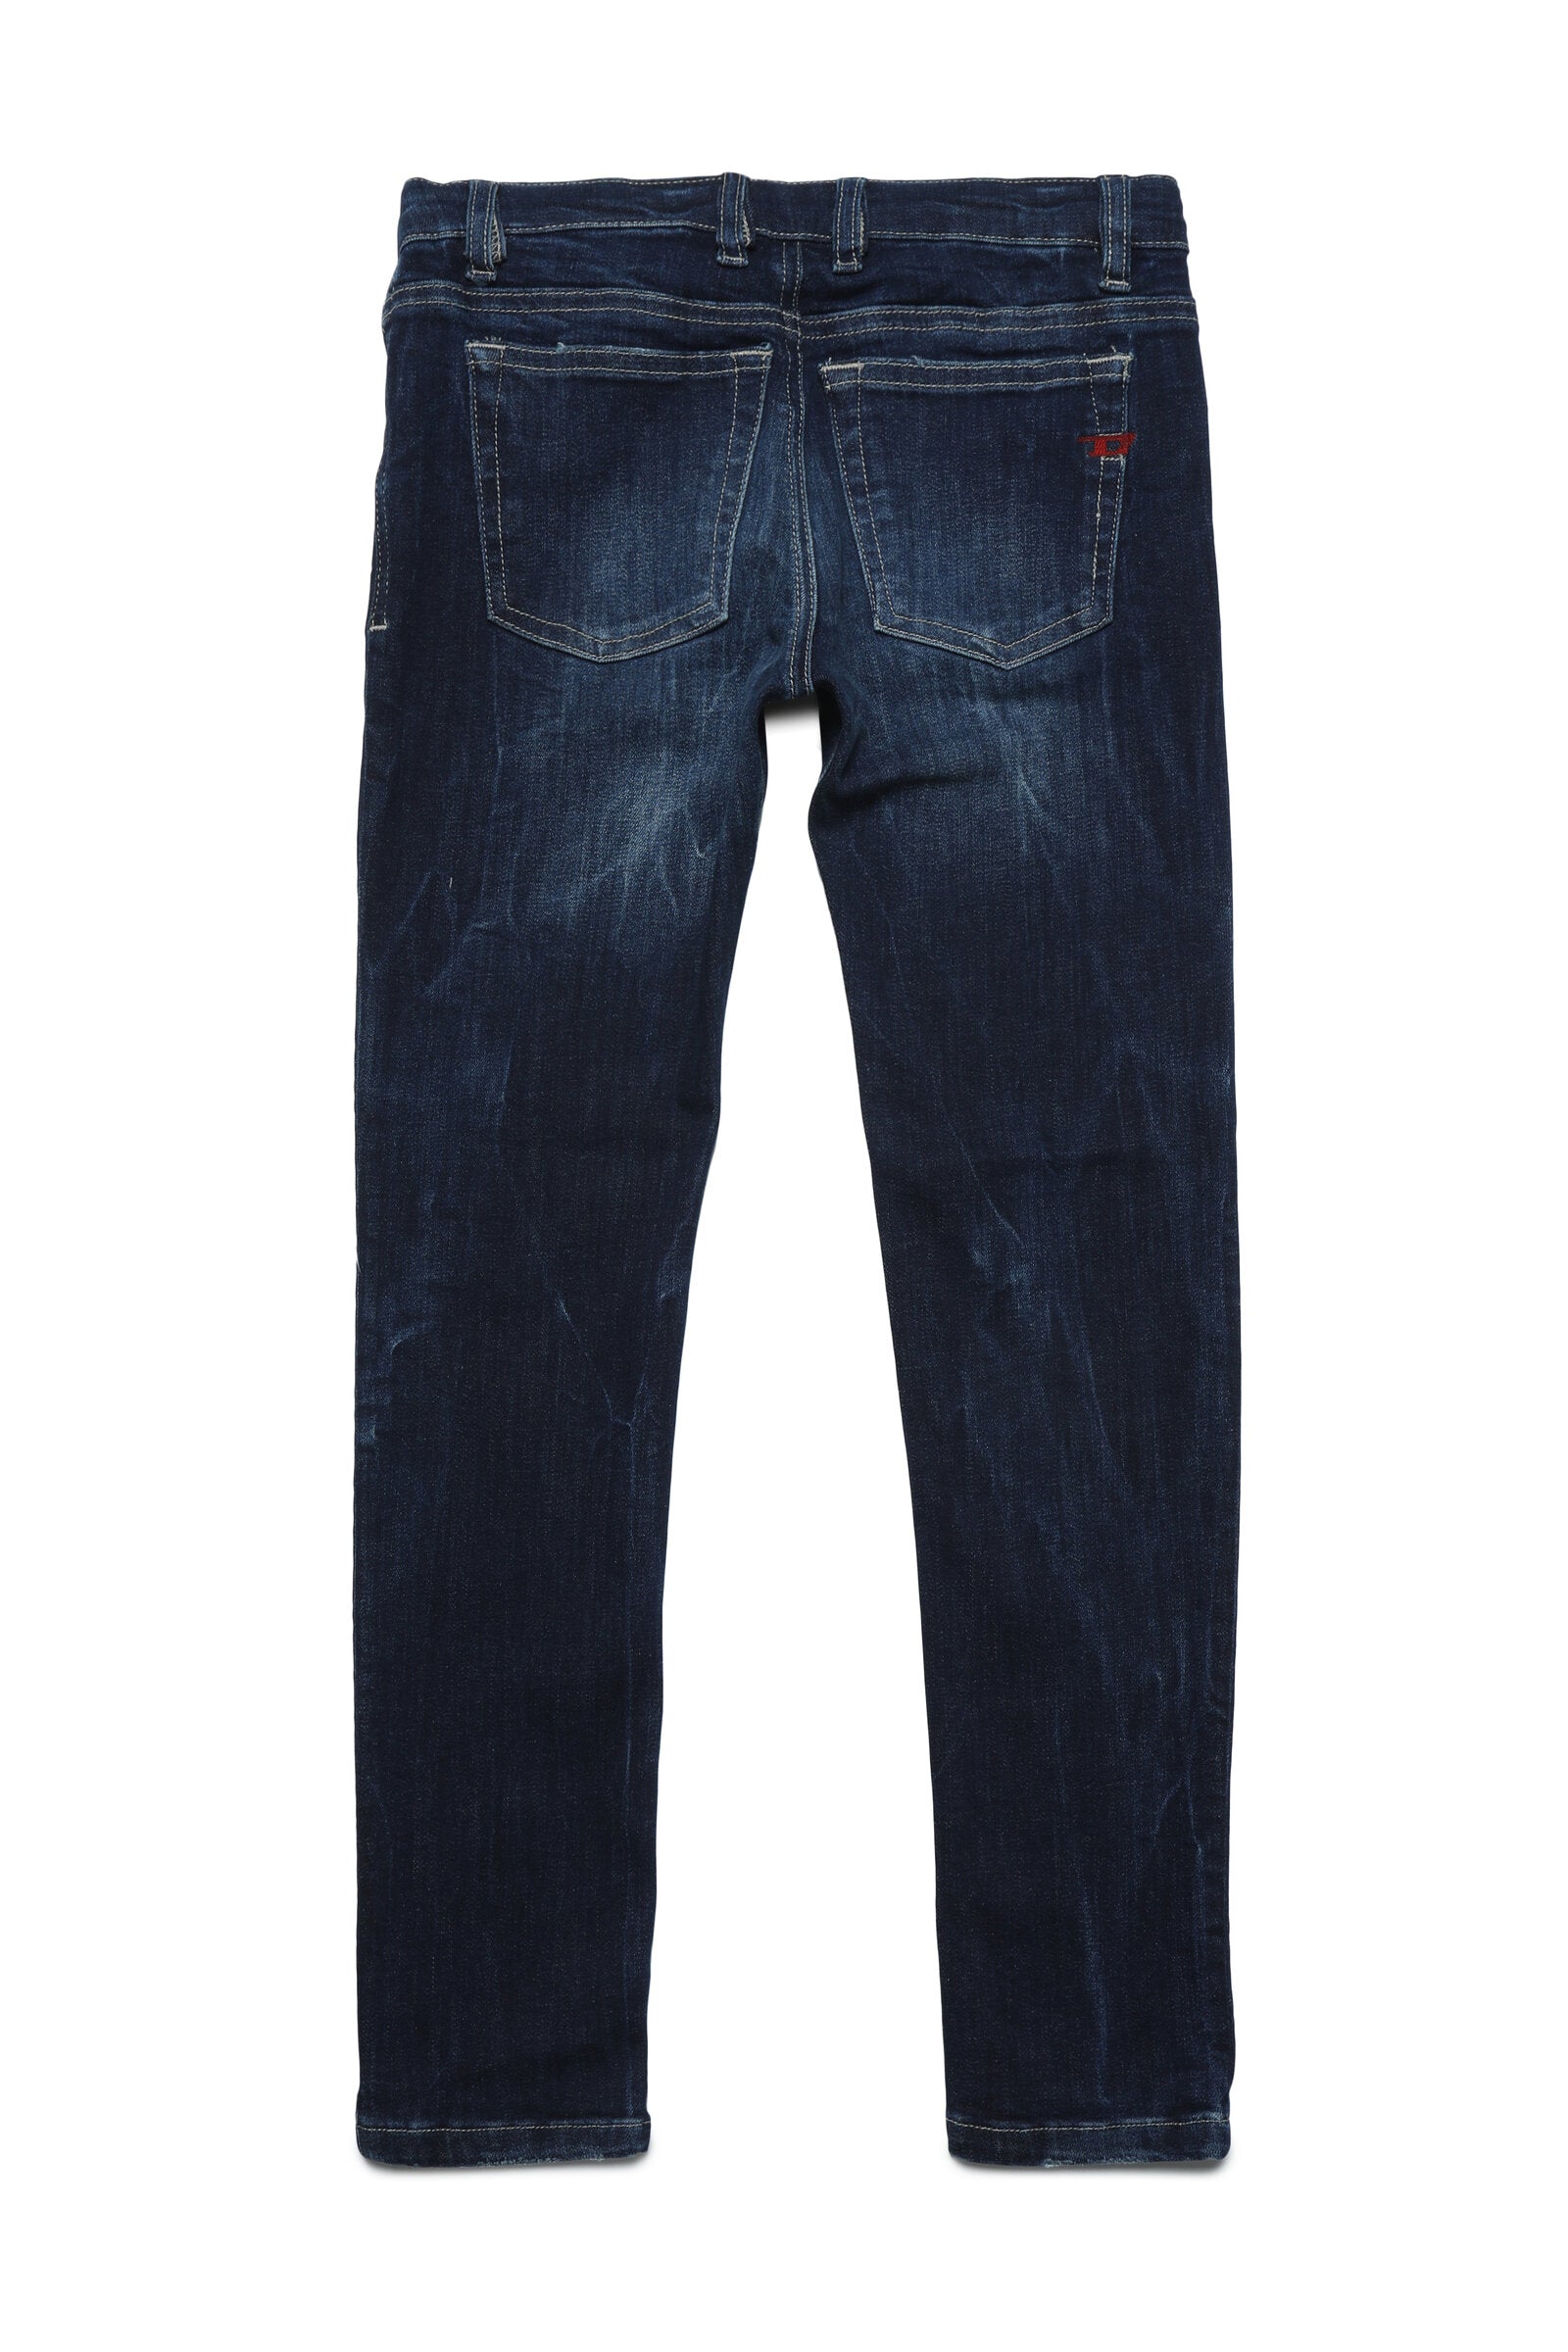 Jeans 1979 Sleenker skinny dark blue faded jeans with abrasions